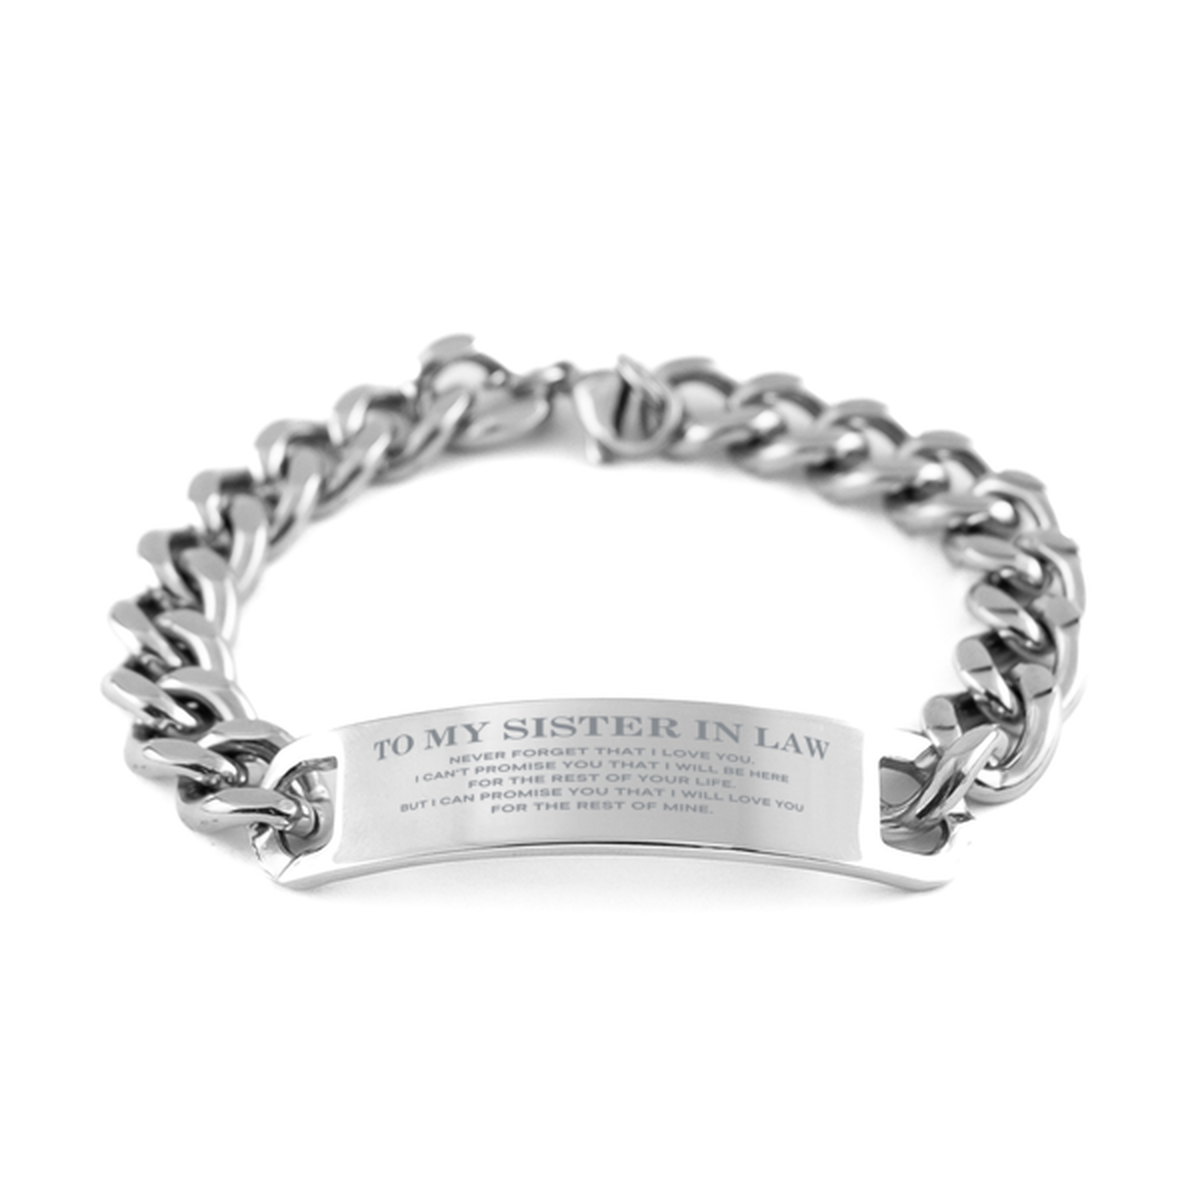 To My Sister In Law Gifts, I will love you for the rest of mine, Love Sister In Law Bracelet, Birthday Christmas Unique Cuban Chain Stainless Steel Bracelet For Sister In Law